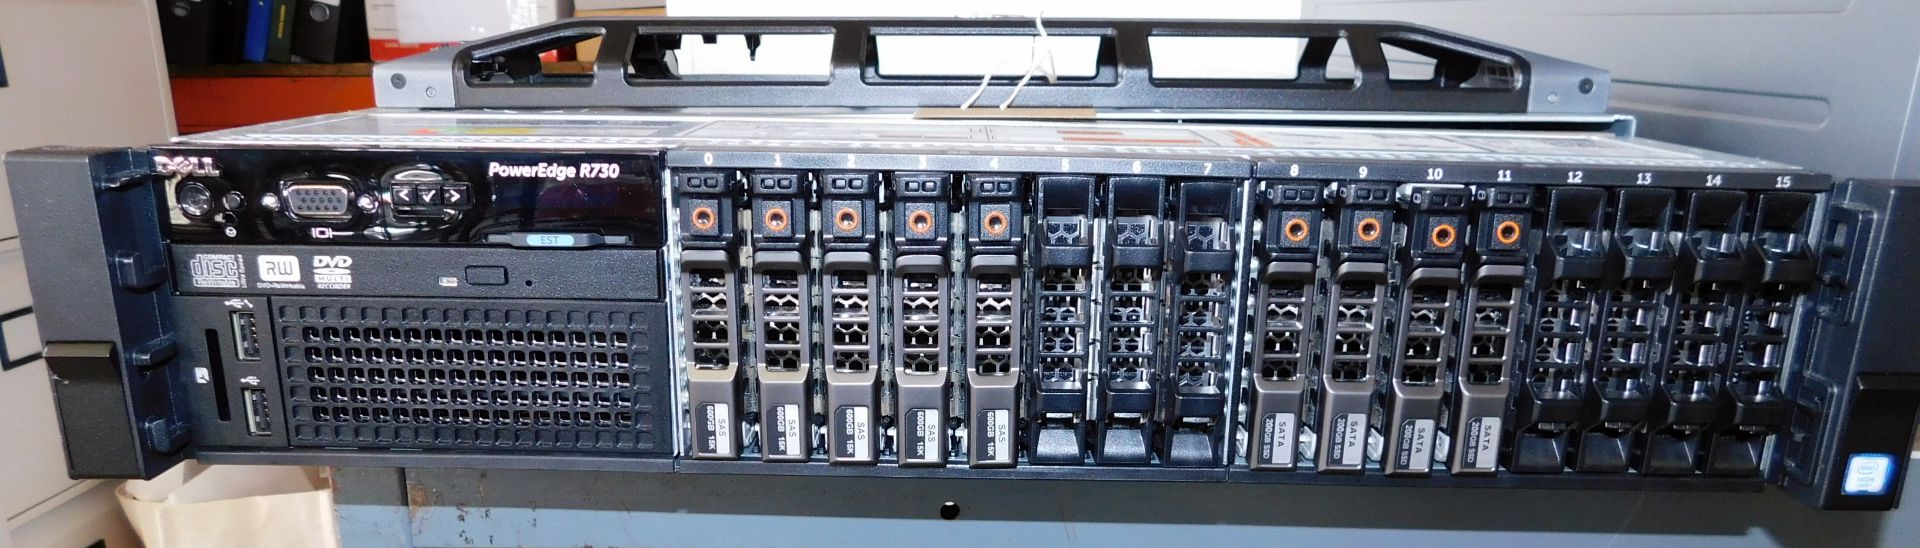 Dell PowerEdge R730 Rack Mounted Server (No HDD) (Located Stockport) - Image 2 of 2